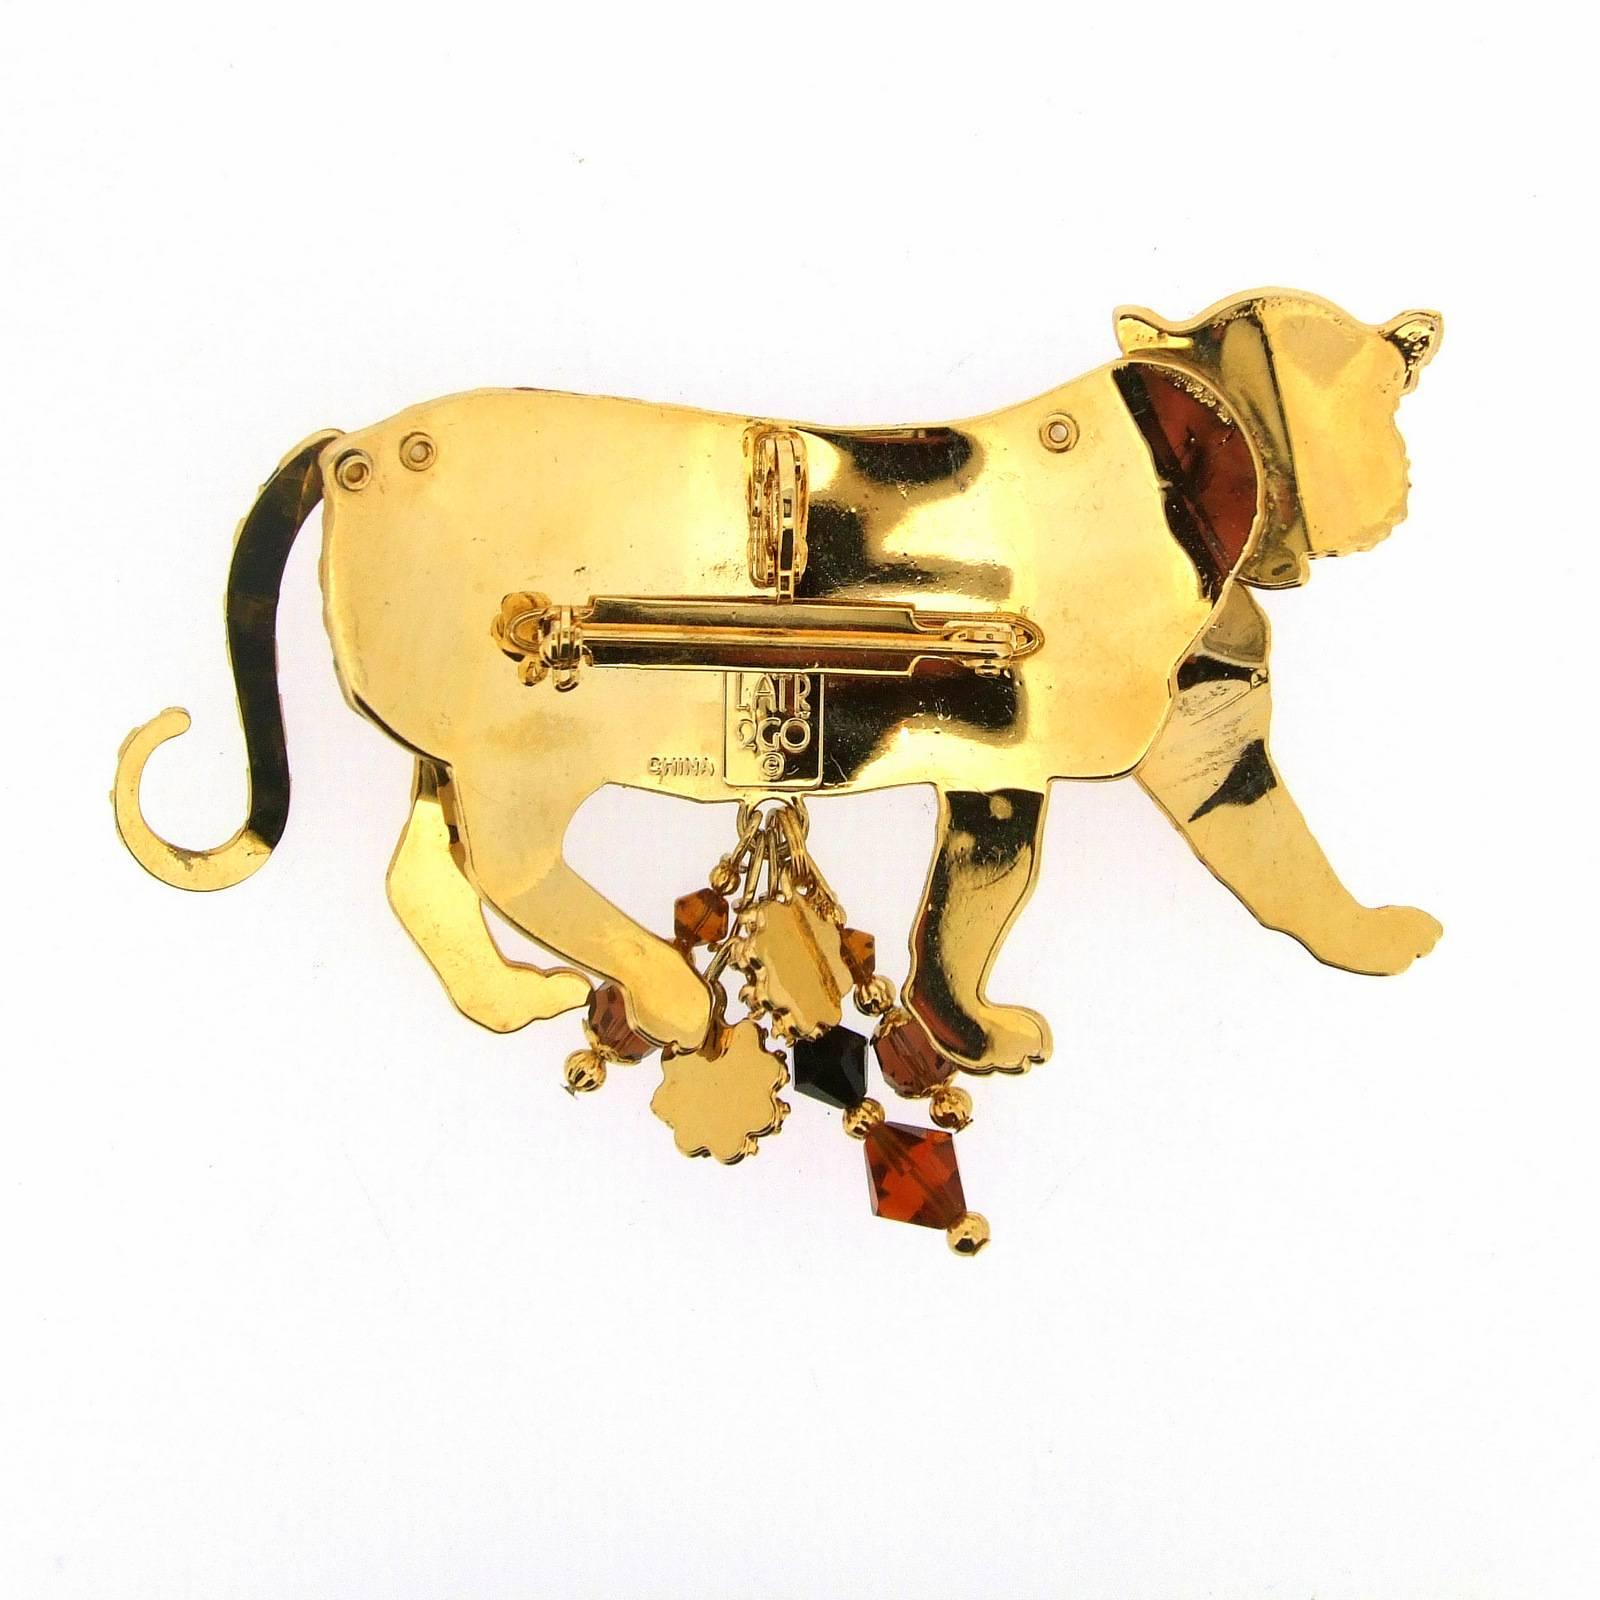 A fabulous large tiger brooch by Lunch At The Ritz featuring moving limbs. The Tails and front yellow enameled legs move back and forth.

Lunch At The Ritz was launched in 1982 and creates the most fun, whimsical and enchanting jewellery,